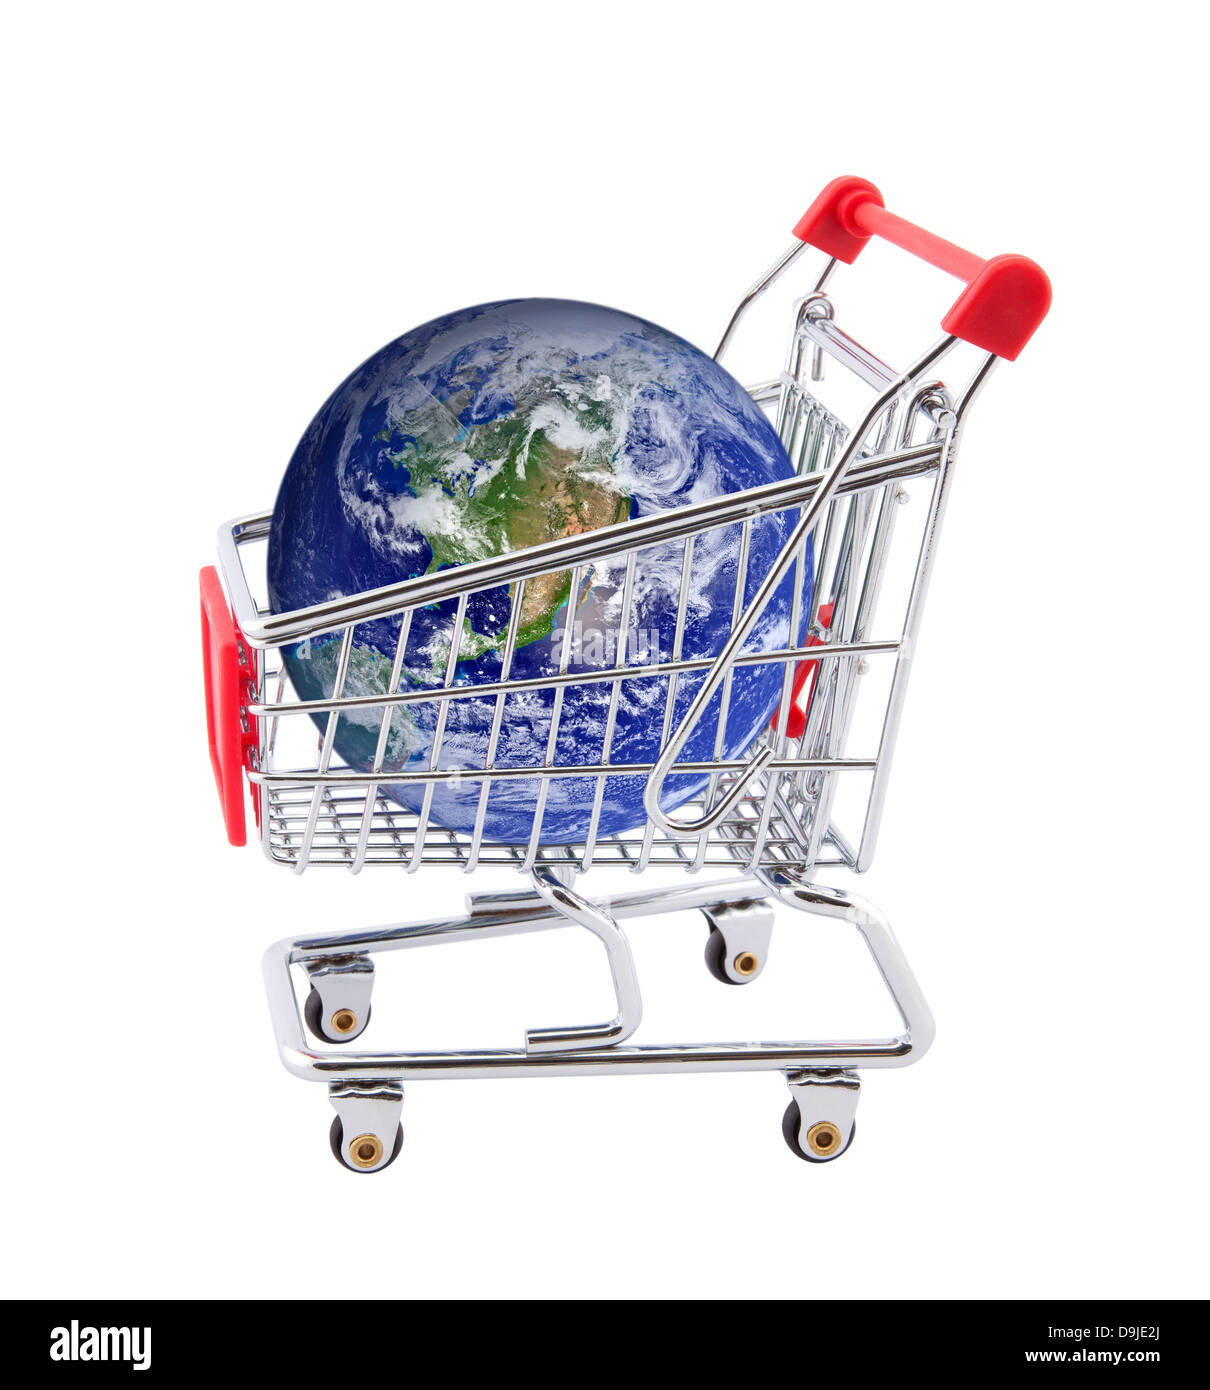 Shopping cart with globe isolated on white. Earth image provided by Nasa. Stock Photo